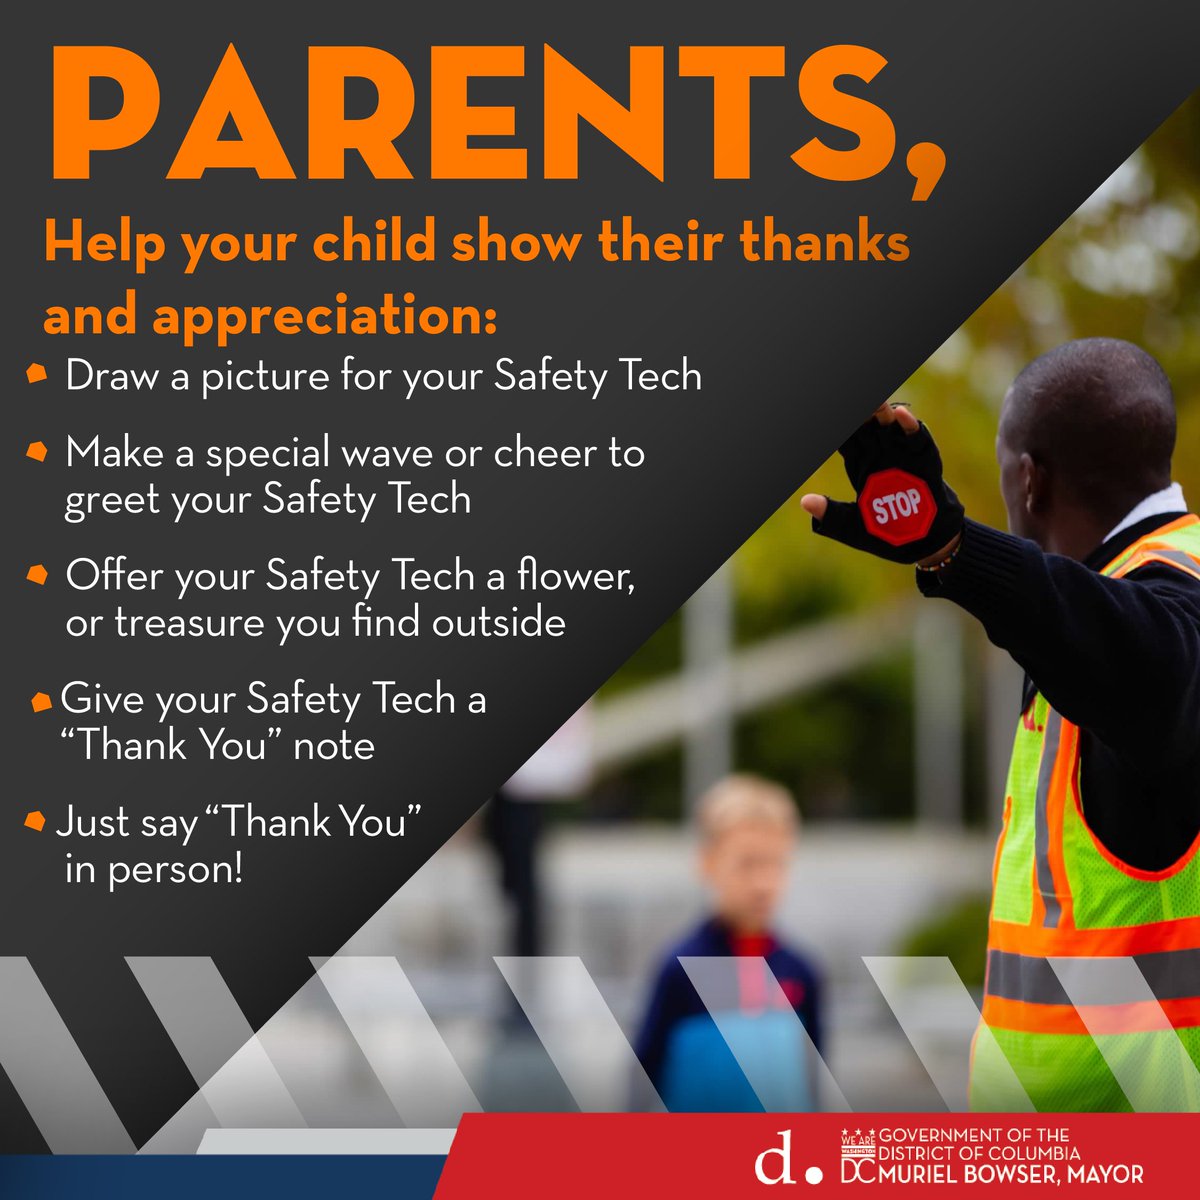 Get ready, DC! This Friday (3/22), we're celebrating the 2nd #SafetyTechAppreciationDay! Join us in thanking the individuals who keep our students safe every day. Give your favorite Safety Tech a shoutout, or get creative to show your appreciation. More 🔽 bit.ly/491EkKz